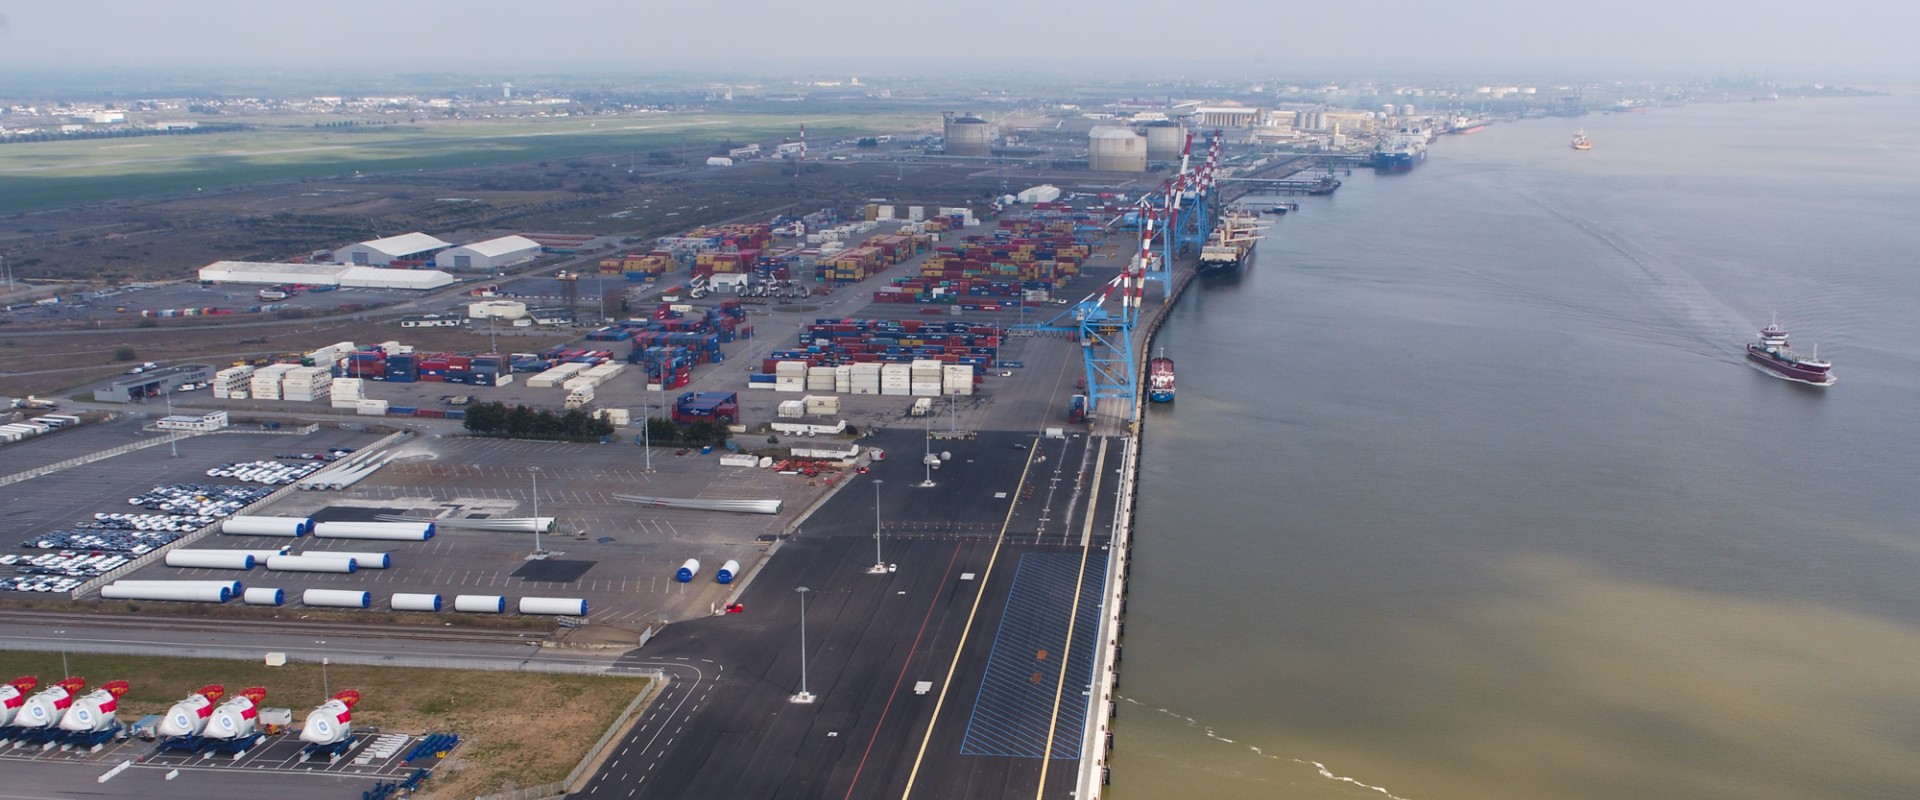 André Drouard at the Head of the Container Terminal Business Unit